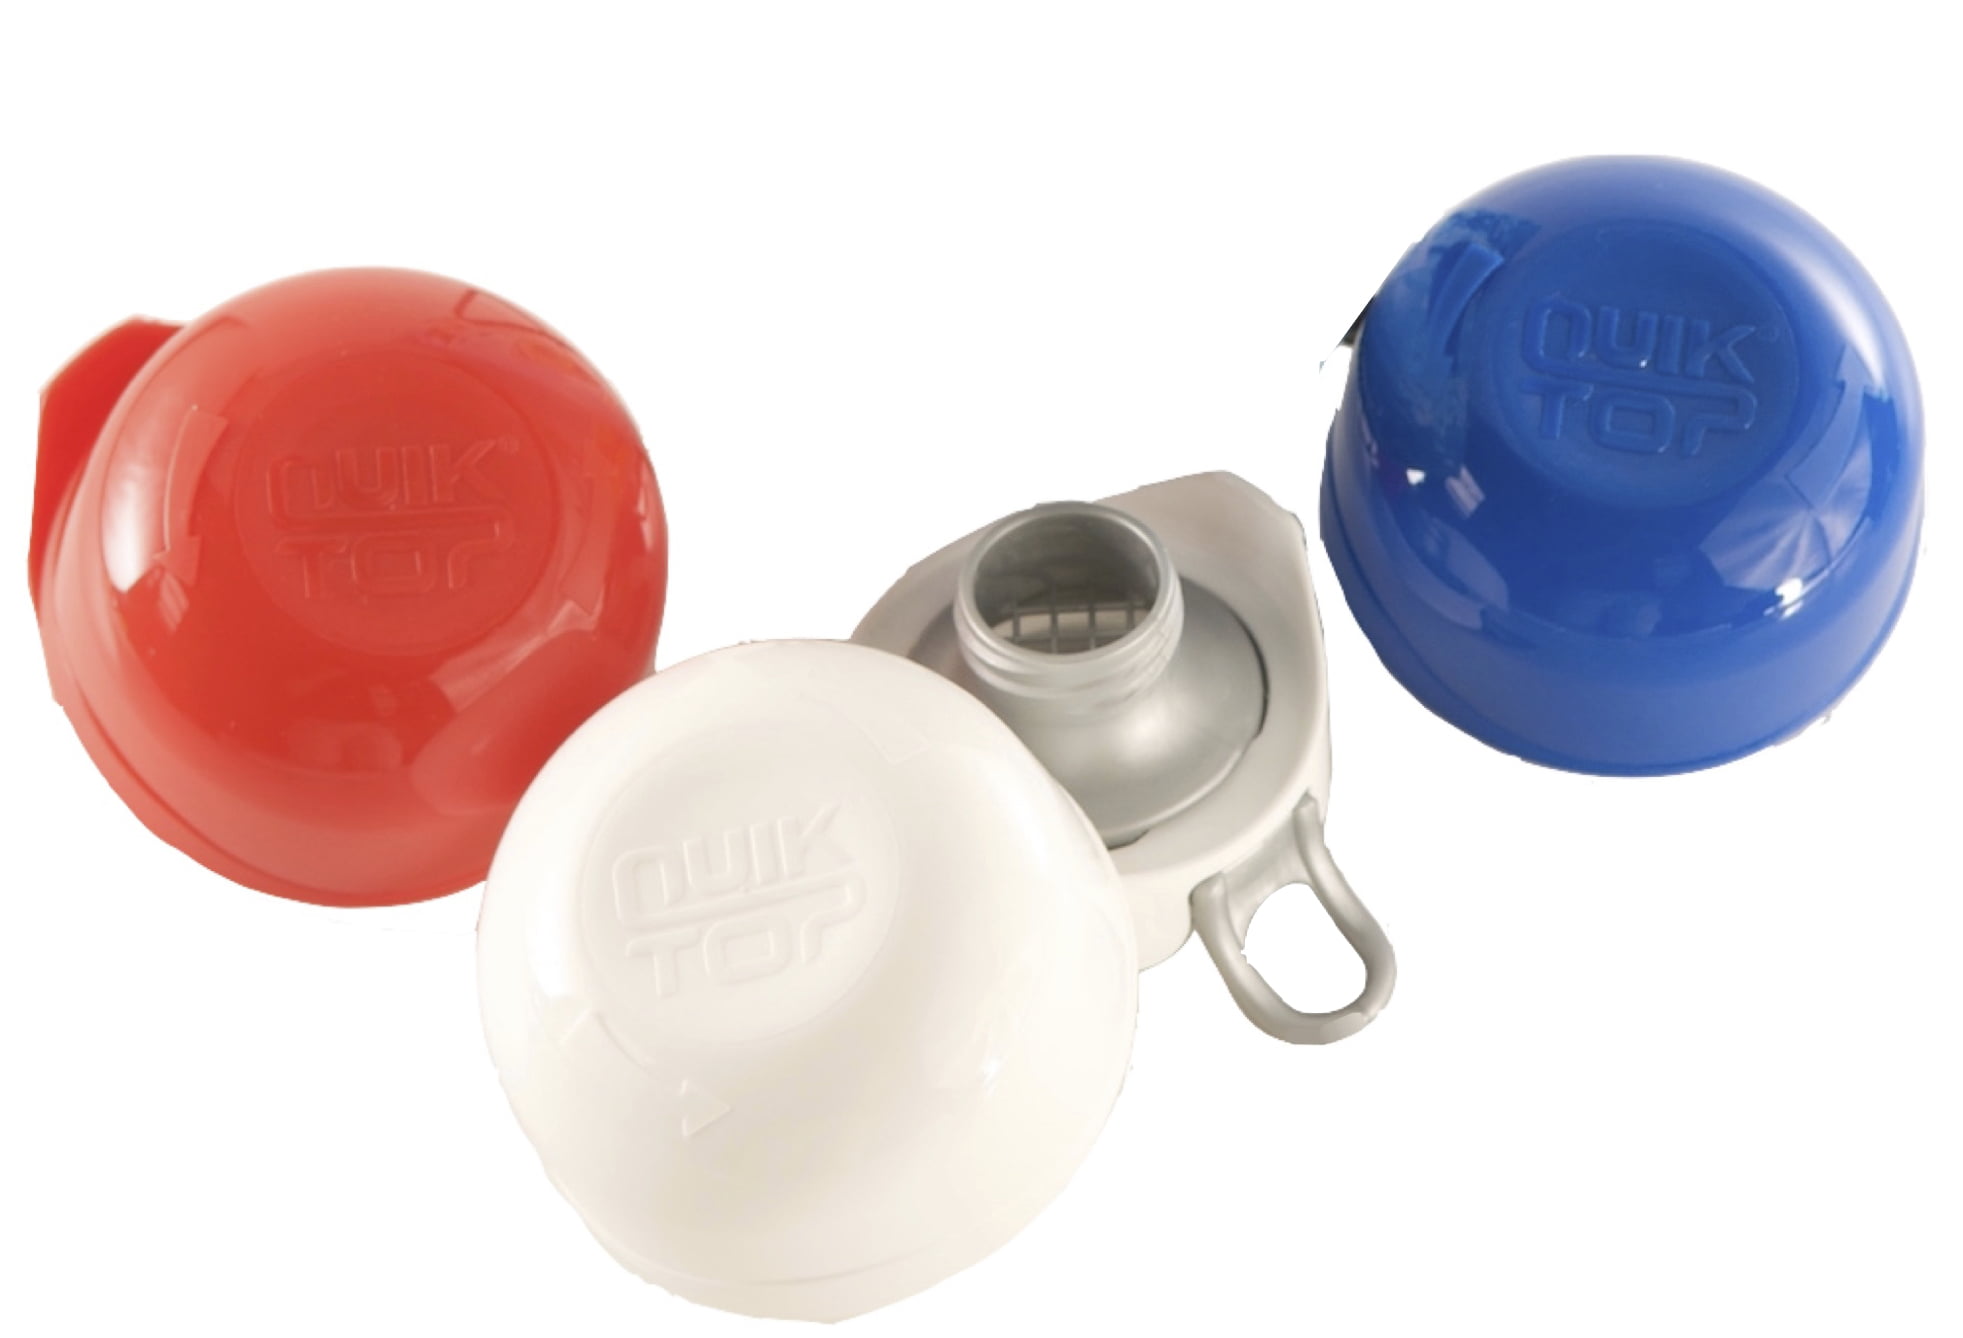 fangst Supplement violinist Compac Quik Top Soda Lid Cover Can Cap Locks in Carbonation, Multi-Function  Cap-Coaster-Cup, Red-White-Blue, 3 Count - Walmart.com